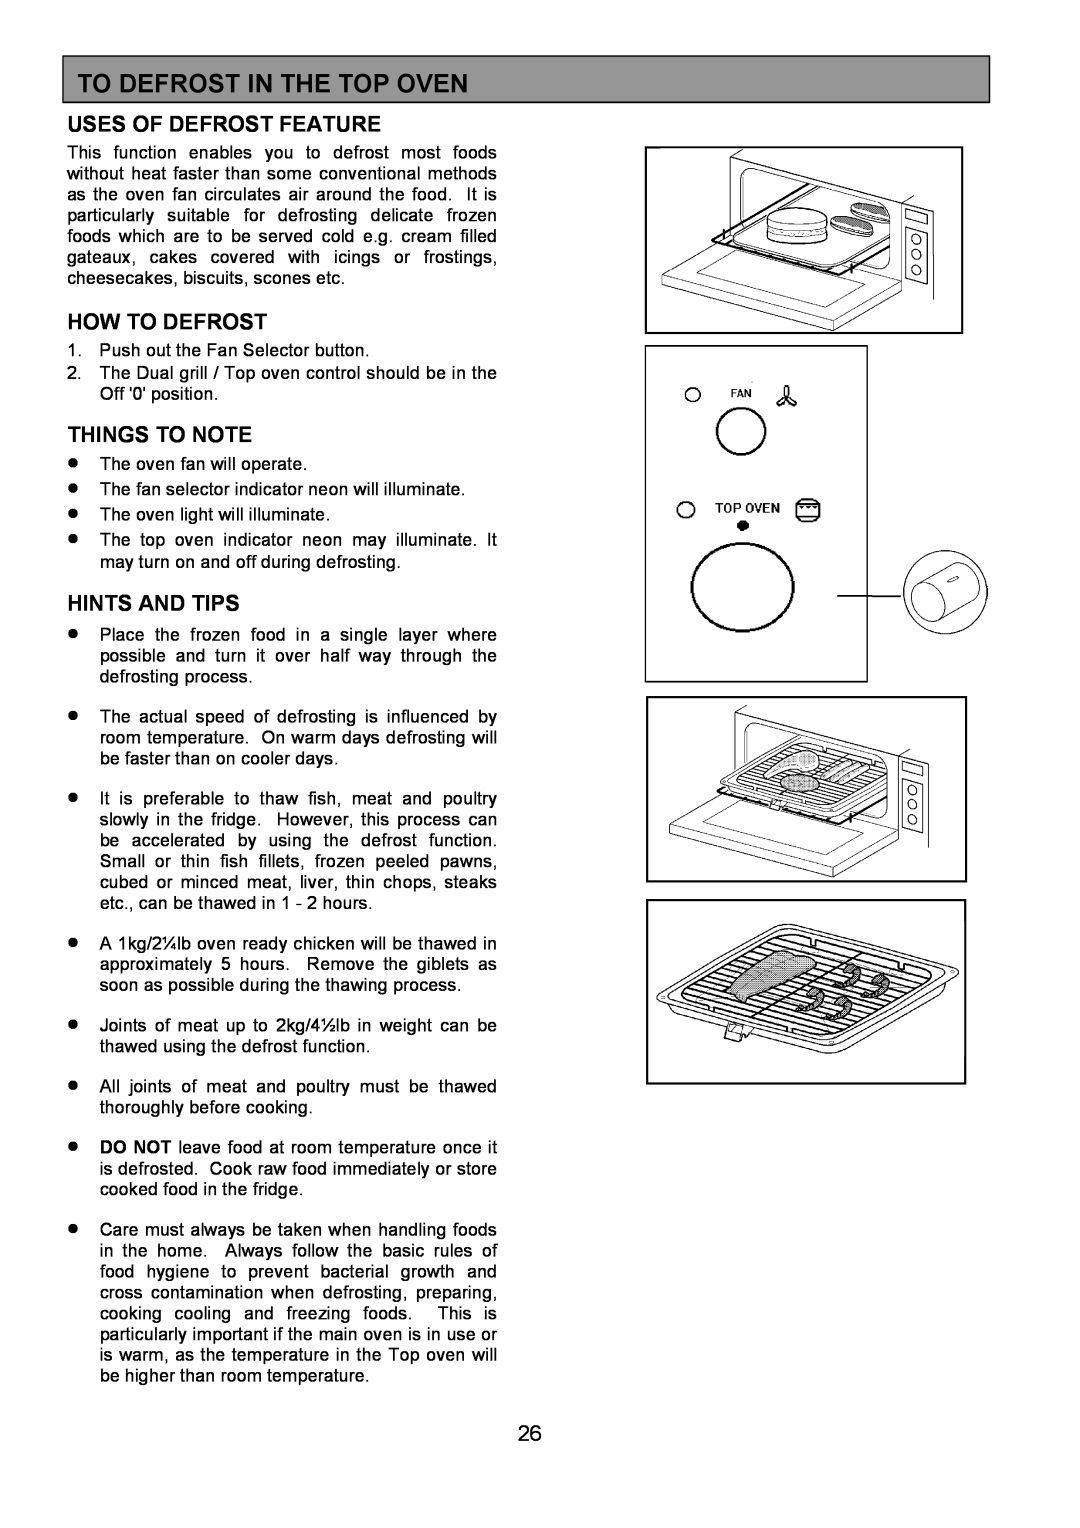 Zanussi 311608901 To Defrost In The Top Oven, Uses Of Defrost Feature, How To Defrost, Things To Note, Hints And Tips 